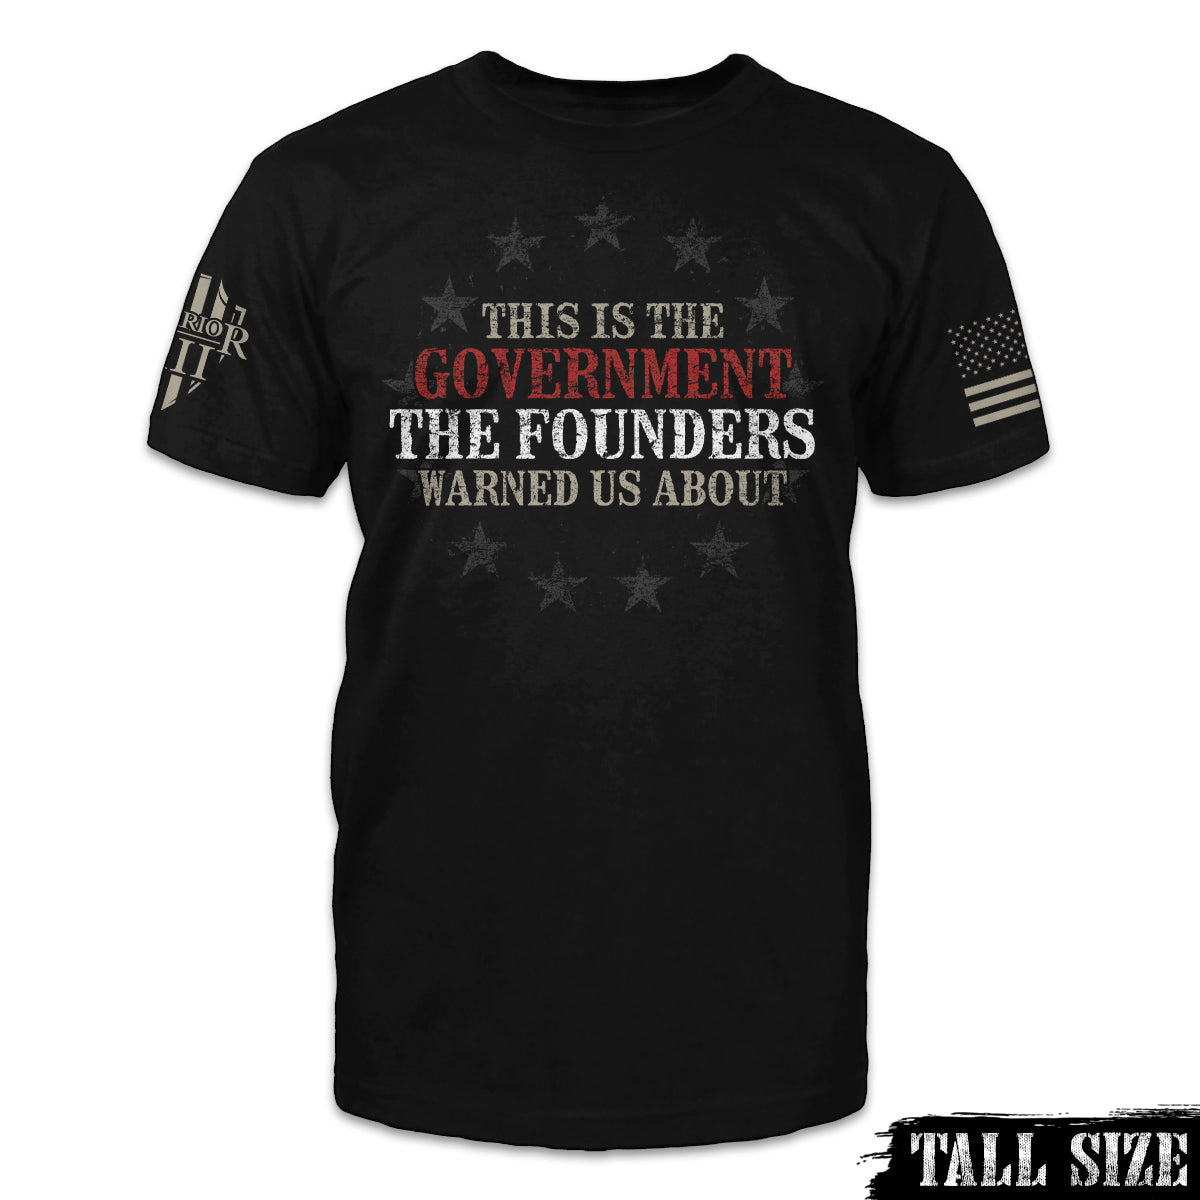 The Founders Warned Us - Tall Size